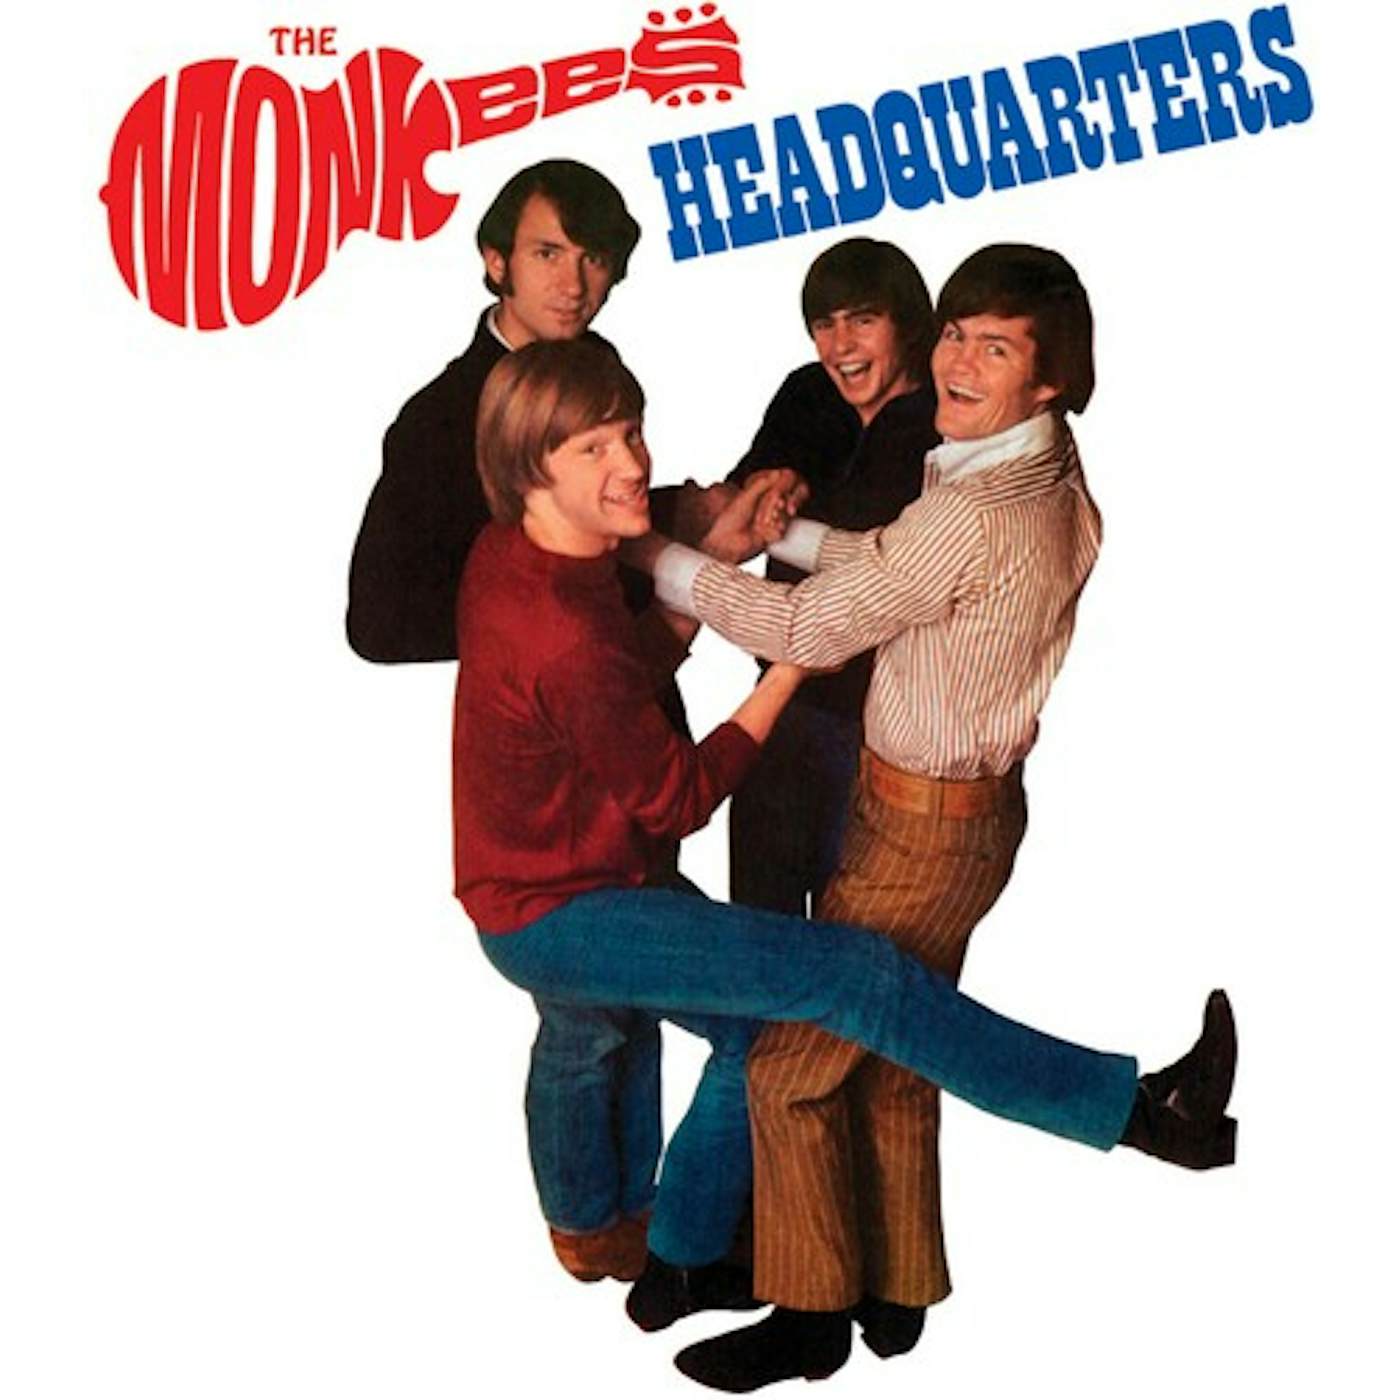 The Monkees Headquarters (Blue/Limited) Vinyl Record